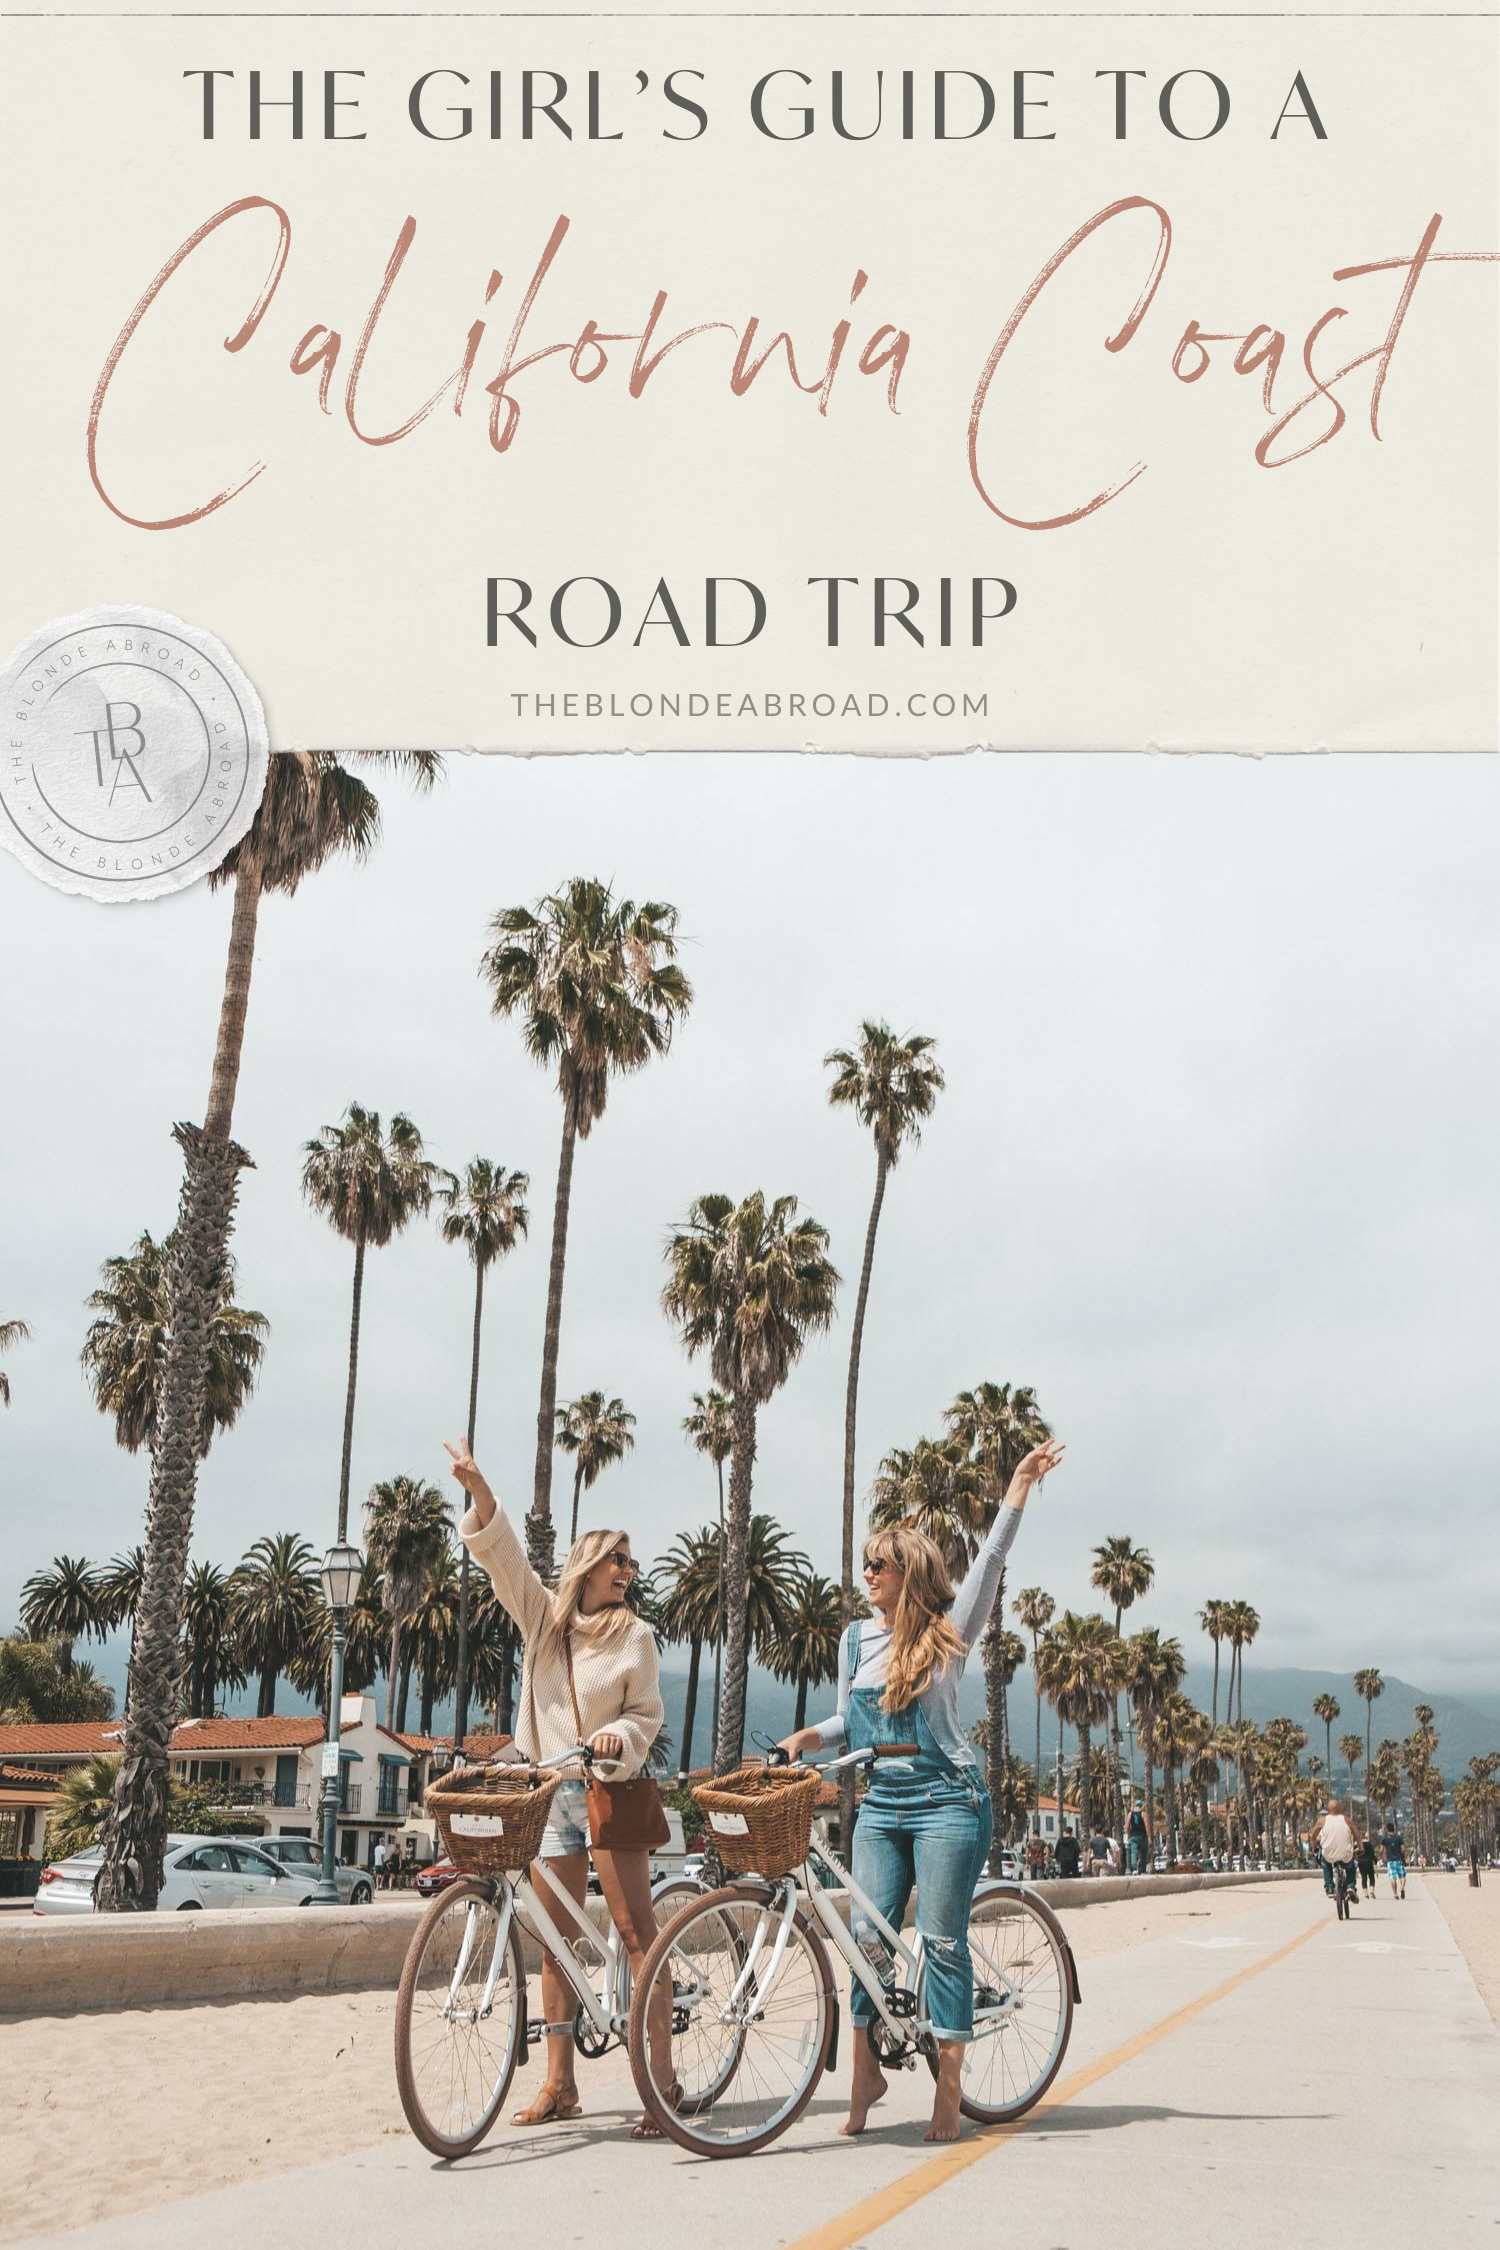 The Girl’s Guide to a California Coast Road Trip